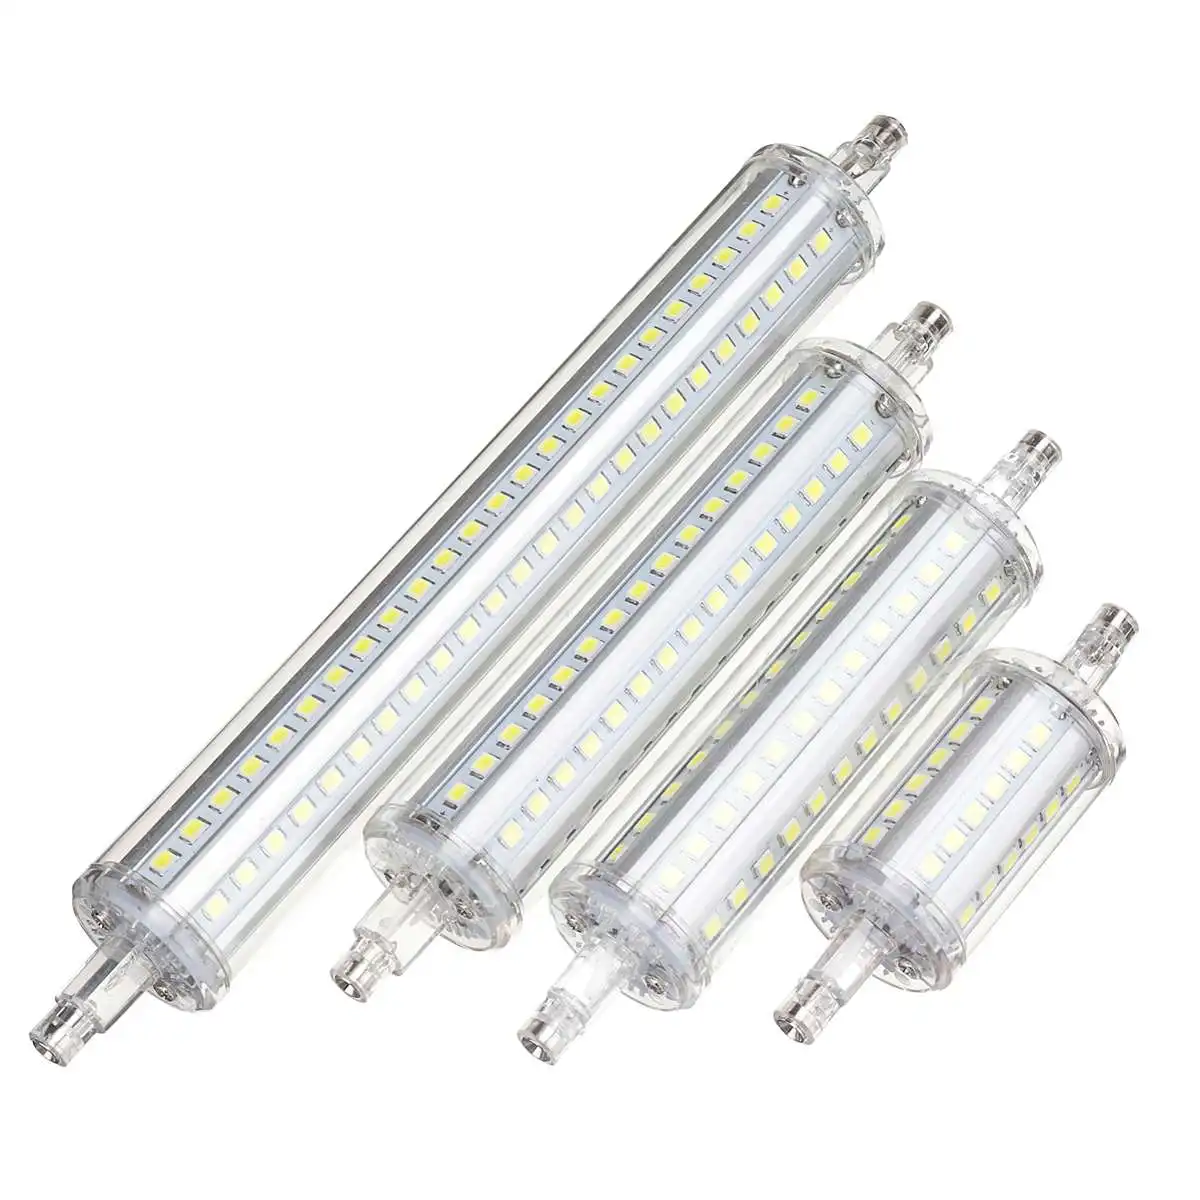 

R7S LED Bulb 36/72/90/144LED Dimmable Corn Lamp 78mm 118 mm 135mm 189mm Replace Halogen Light 5W 10W 12W 15W 85-265V